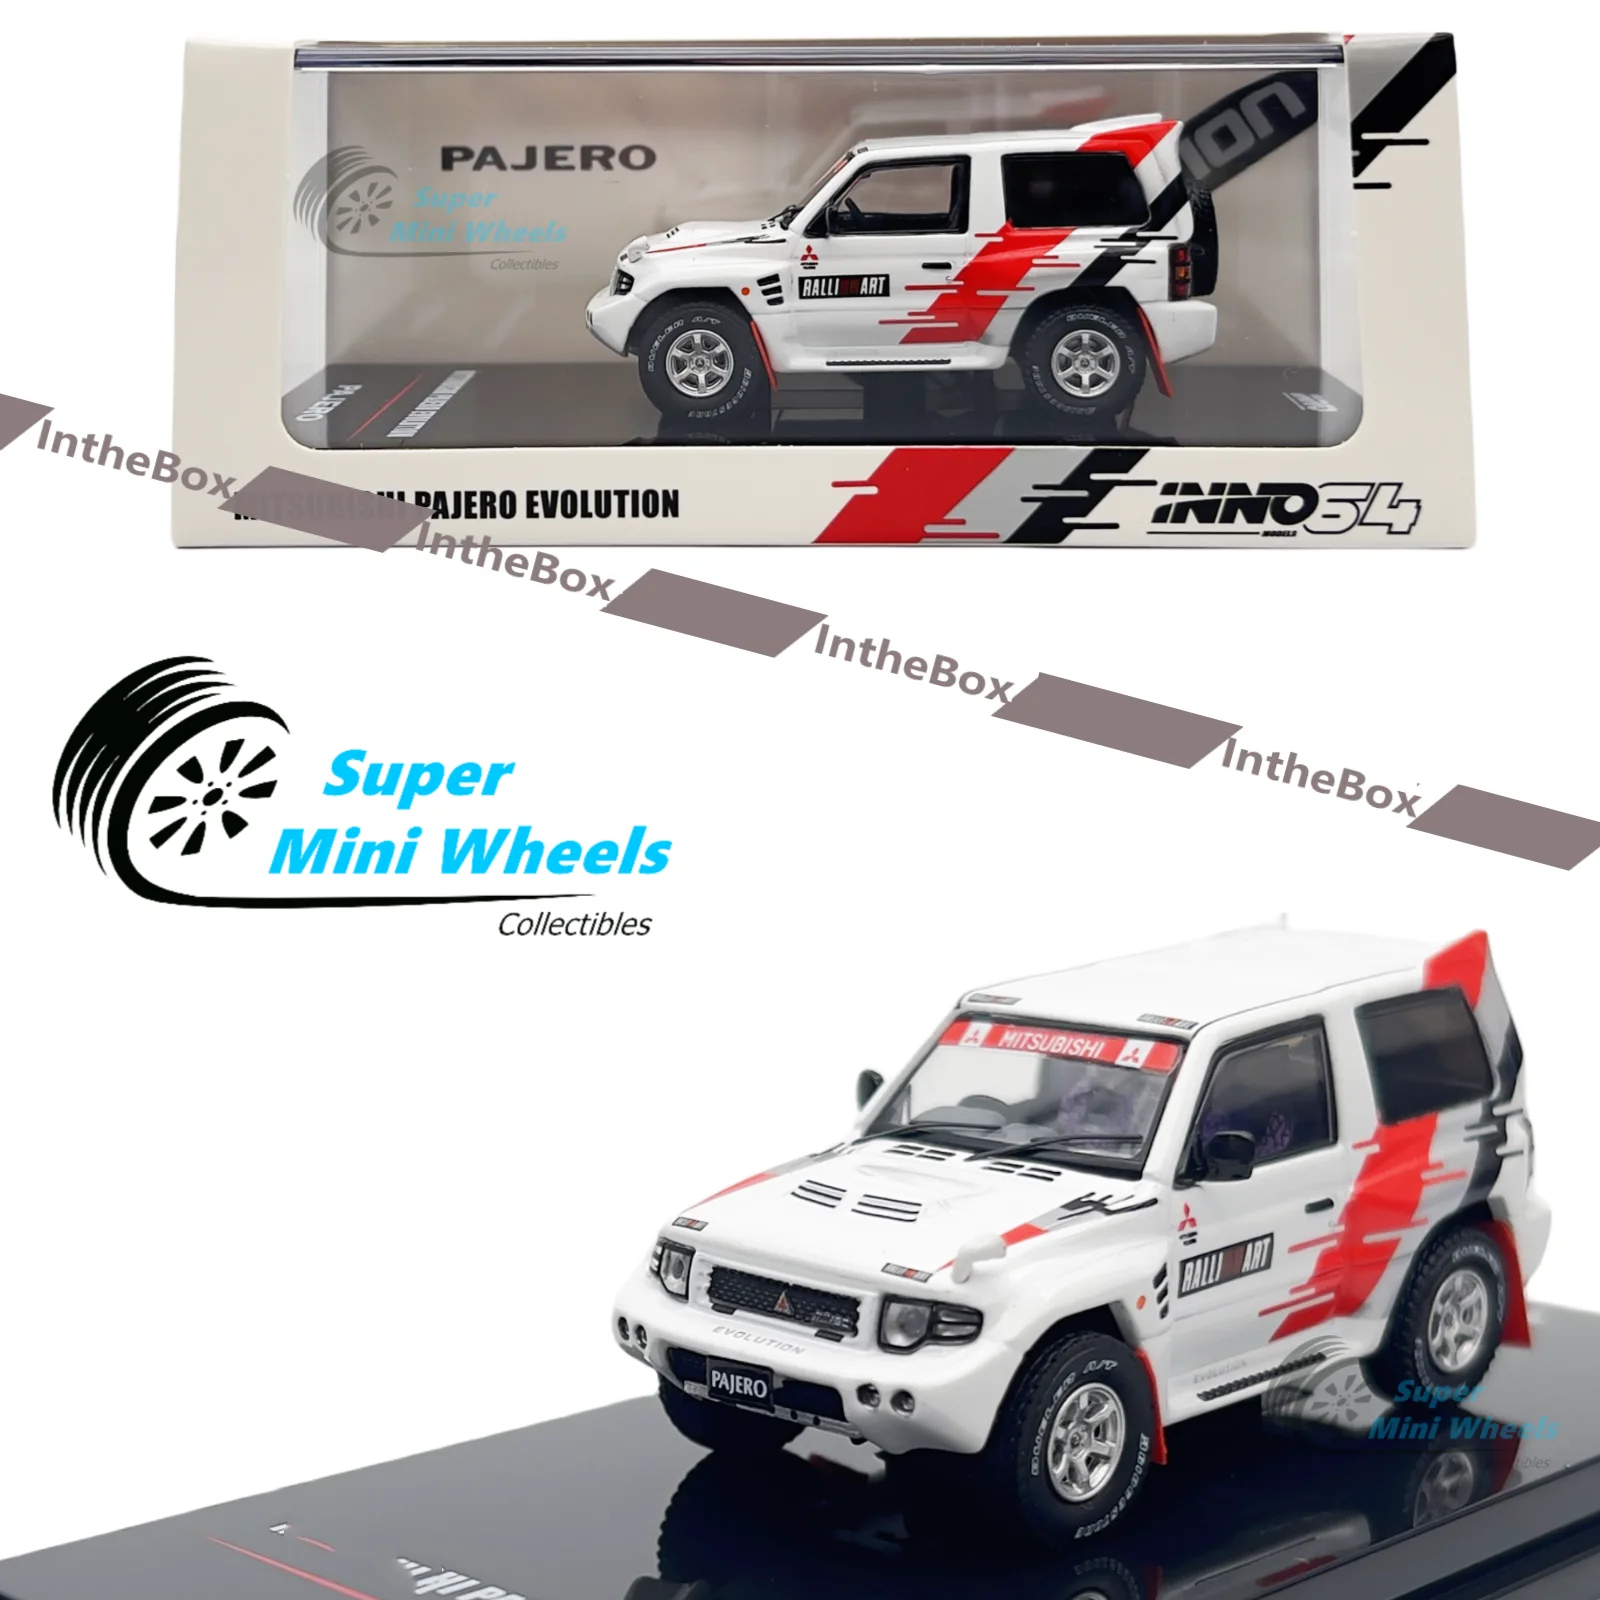 

INNO64 1:64 Pajero Evolution Ralliart Diecast Model Car Collection Limited Edition Hobby Toys